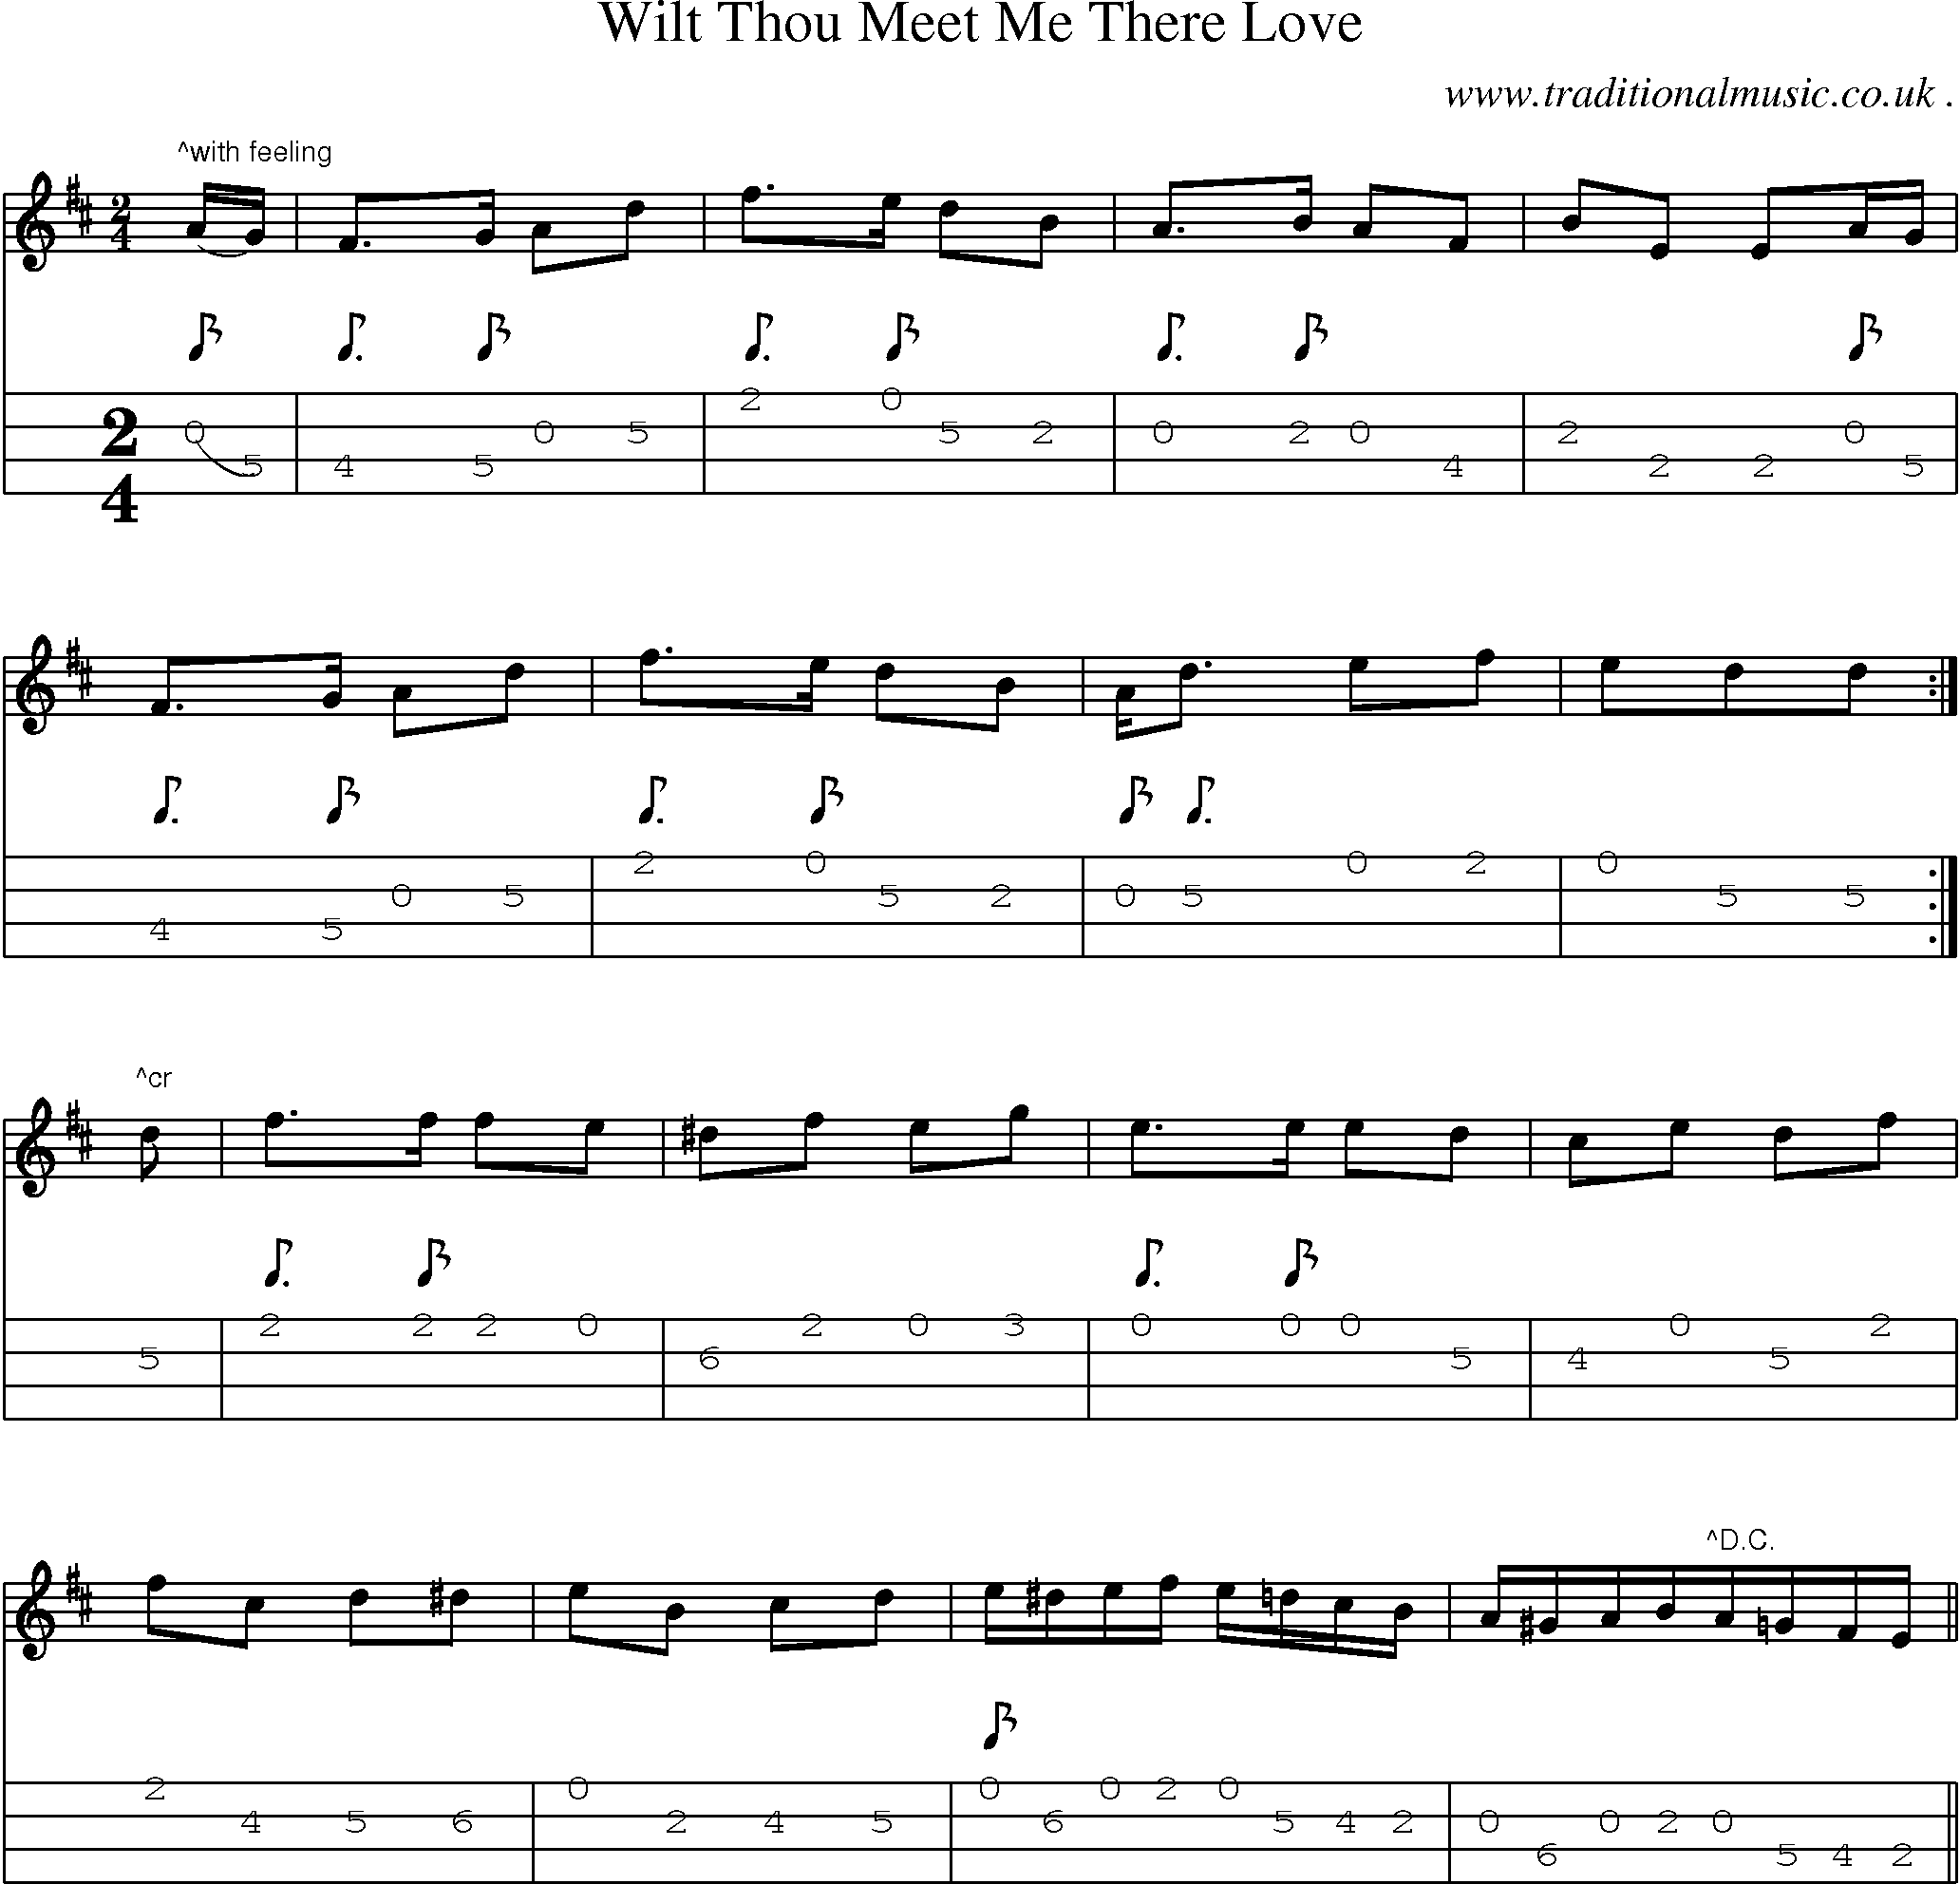 Sheet-Music and Mandolin Tabs for Wilt Thou Meet Me There Love